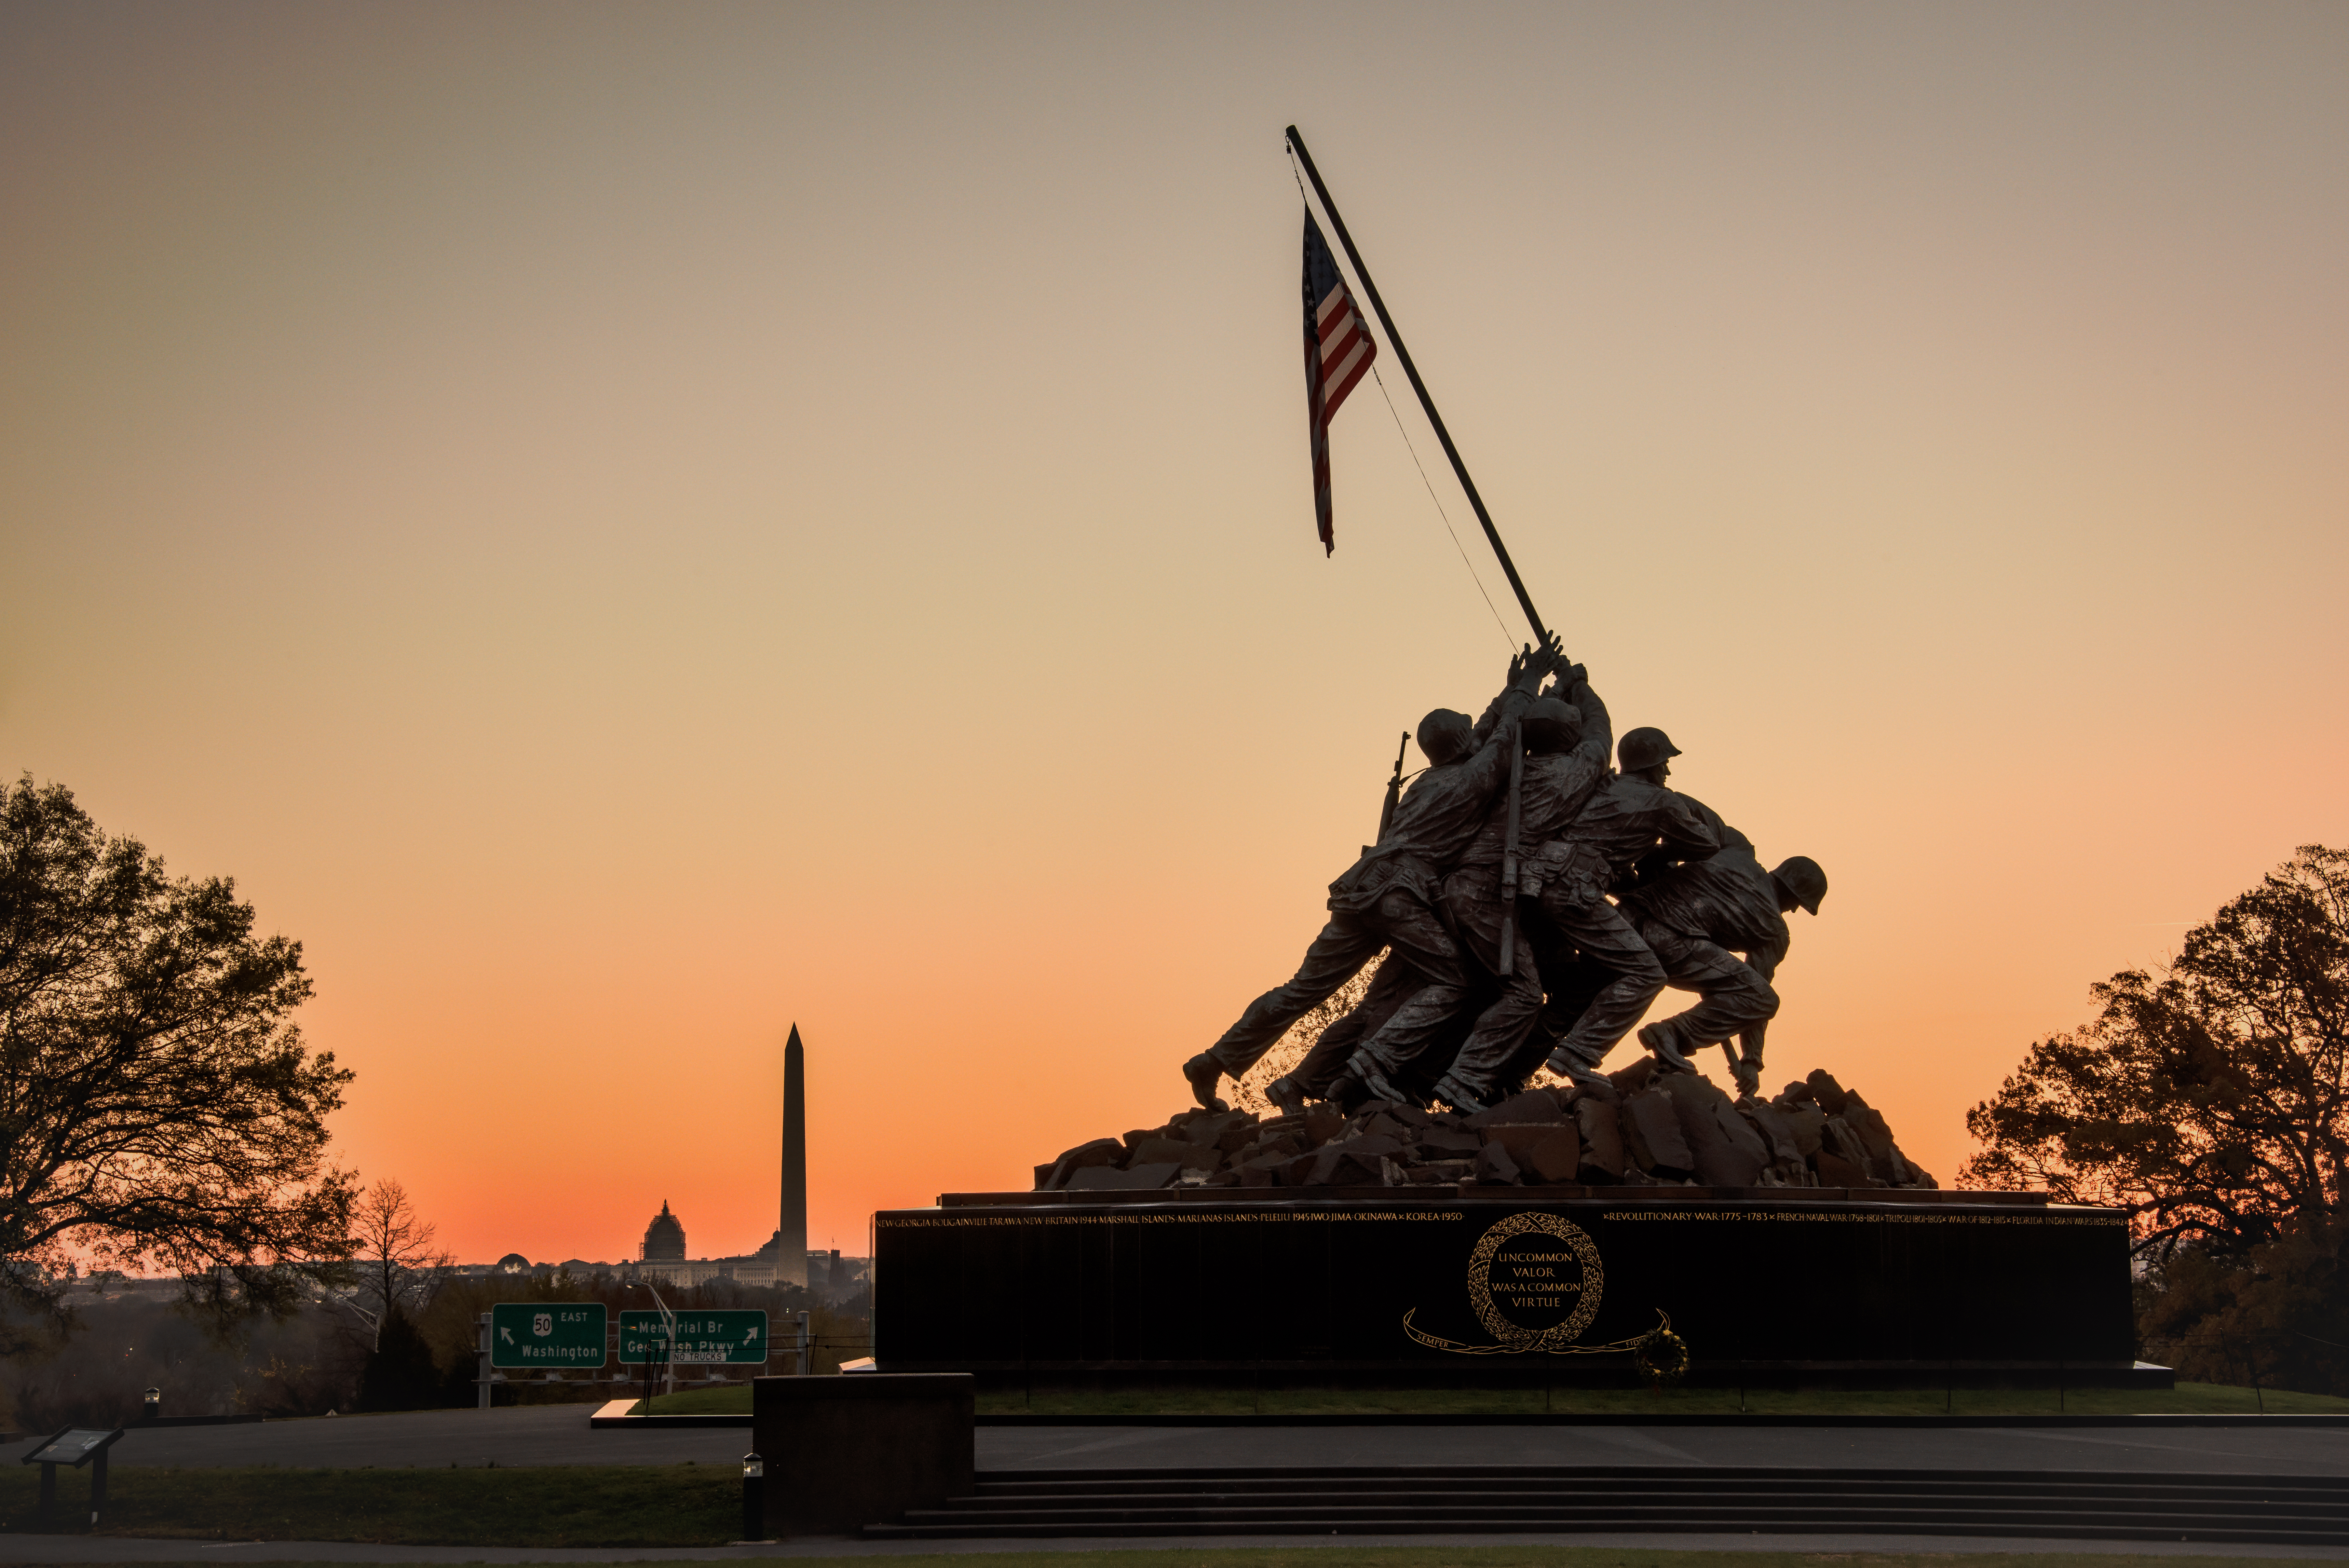 The United States Marine Corps War Memorial by Geoff Livingston